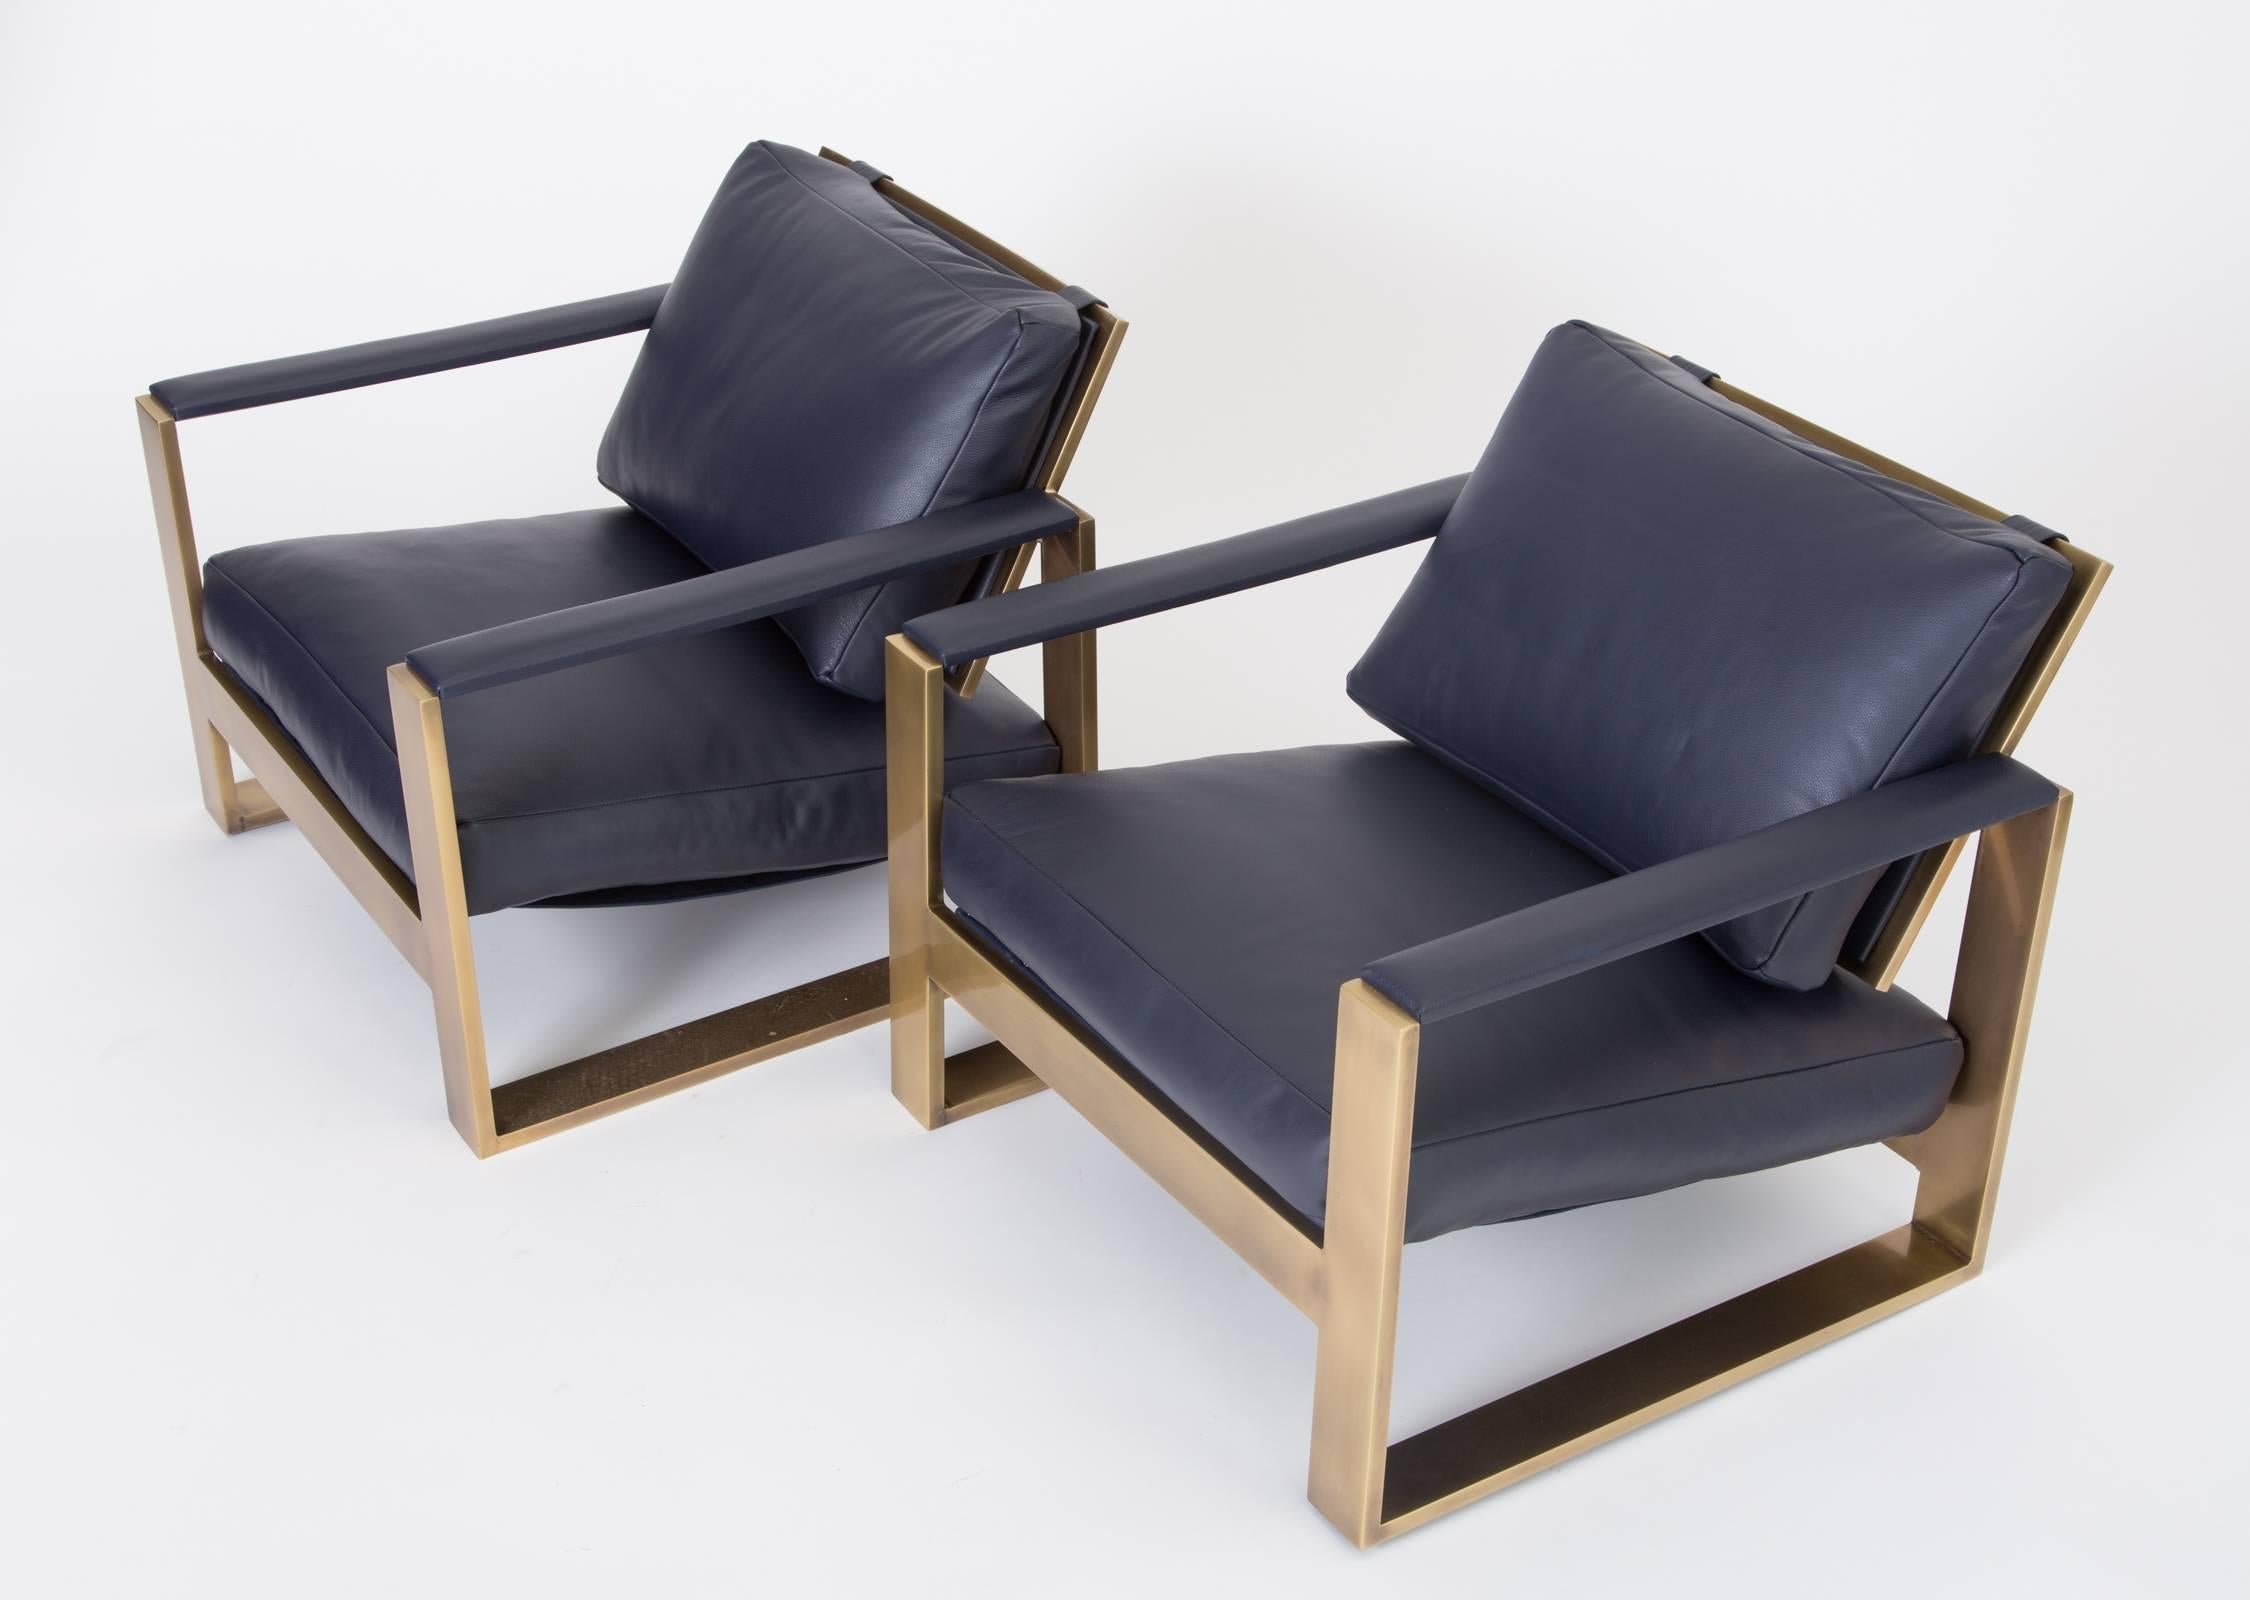 A fully restored pair of low lounge chairs by Milo Baughman for Thayer Coggin have a frame in flat bar bronze, with leather inlays and sumptuous down-filled cushions. Each chair is supported by a curved bar that acts as the legs and armrests, padded